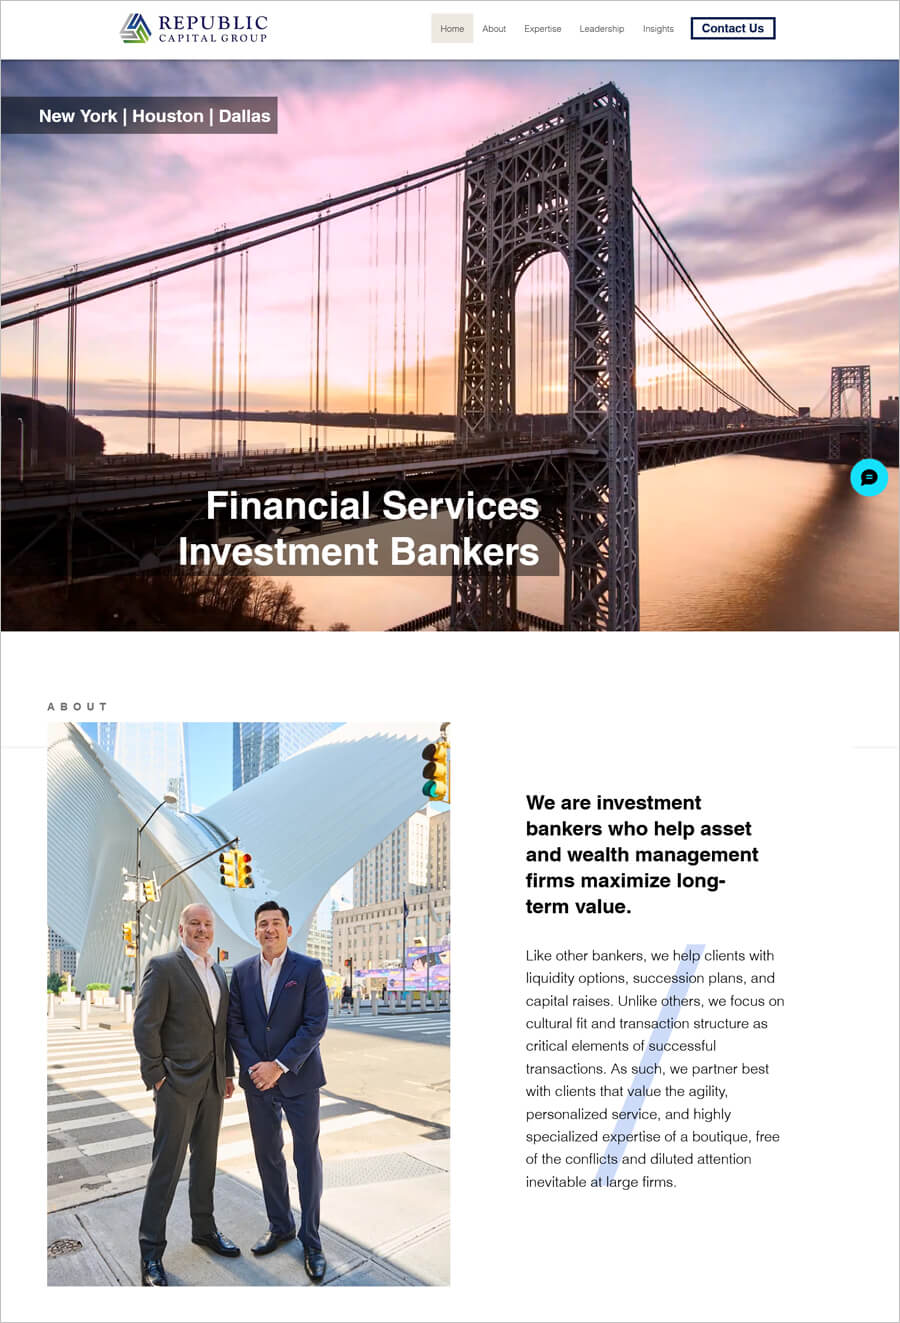 Republic Capital Group small business website example